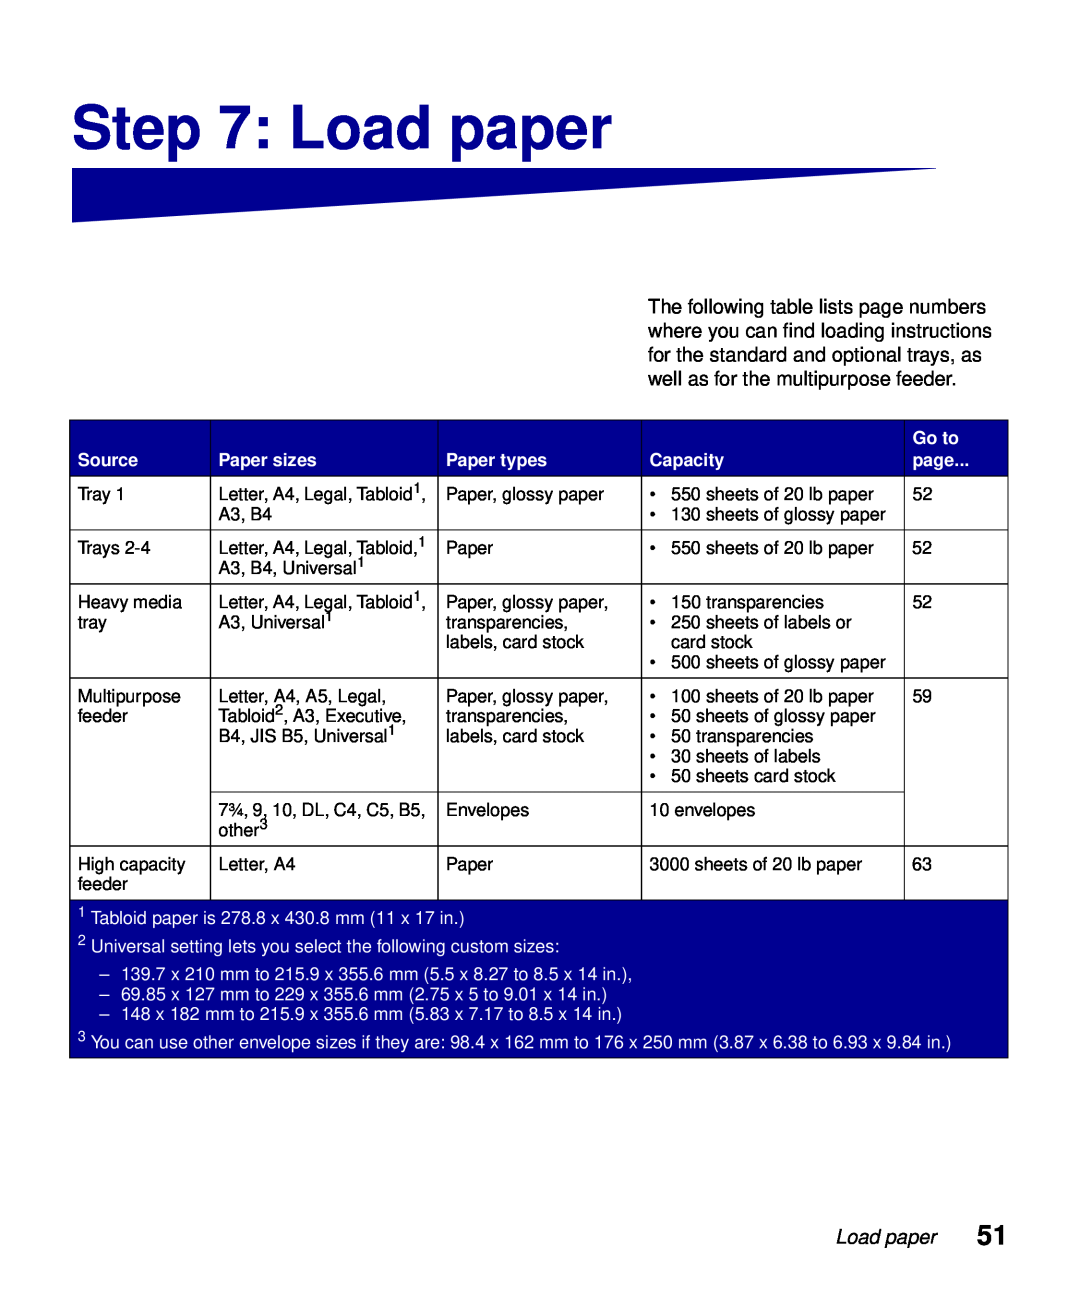 Lexmark S510-2222-00 setup guide Load paper, Go to, Source, Paper sizes, Paper types, Capacity, page 